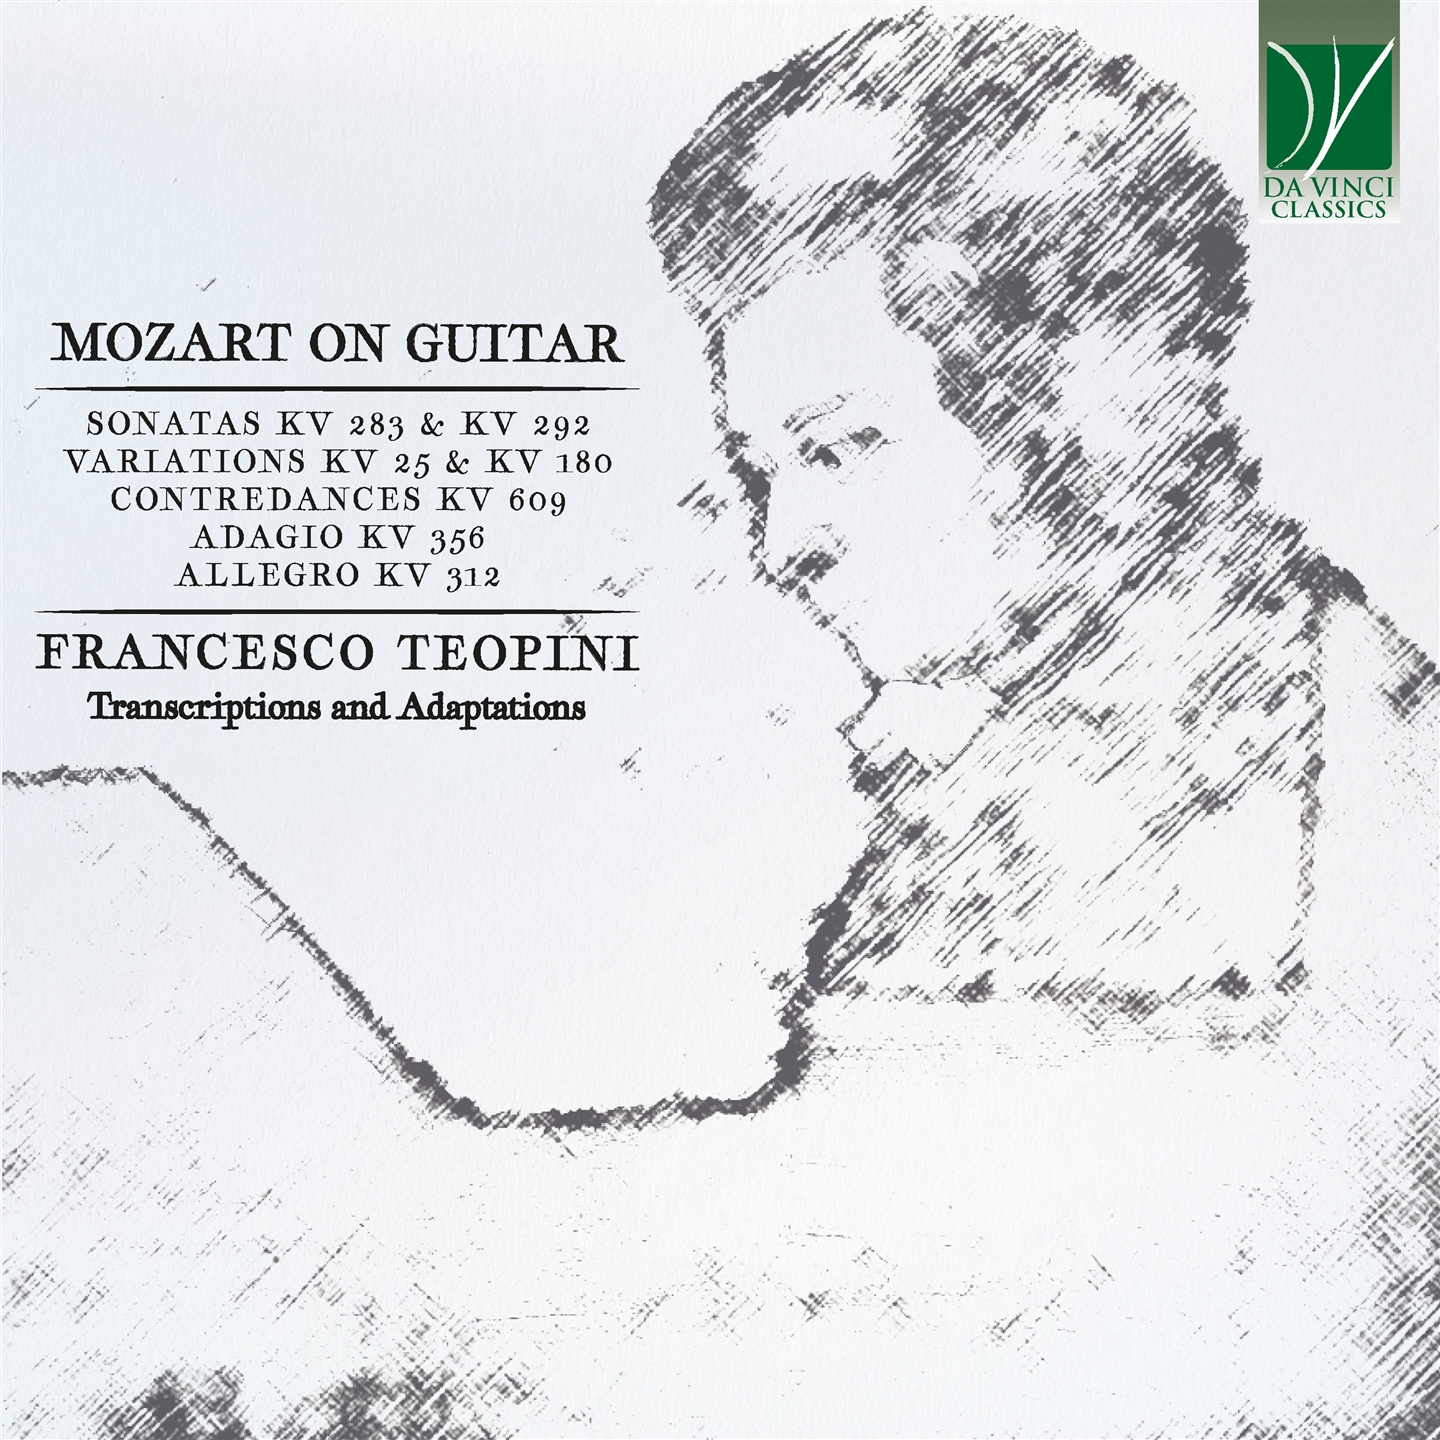 MOZART ON GUITAR (GUITAR TRANSCRITIONS AND ADAPTATIONS)